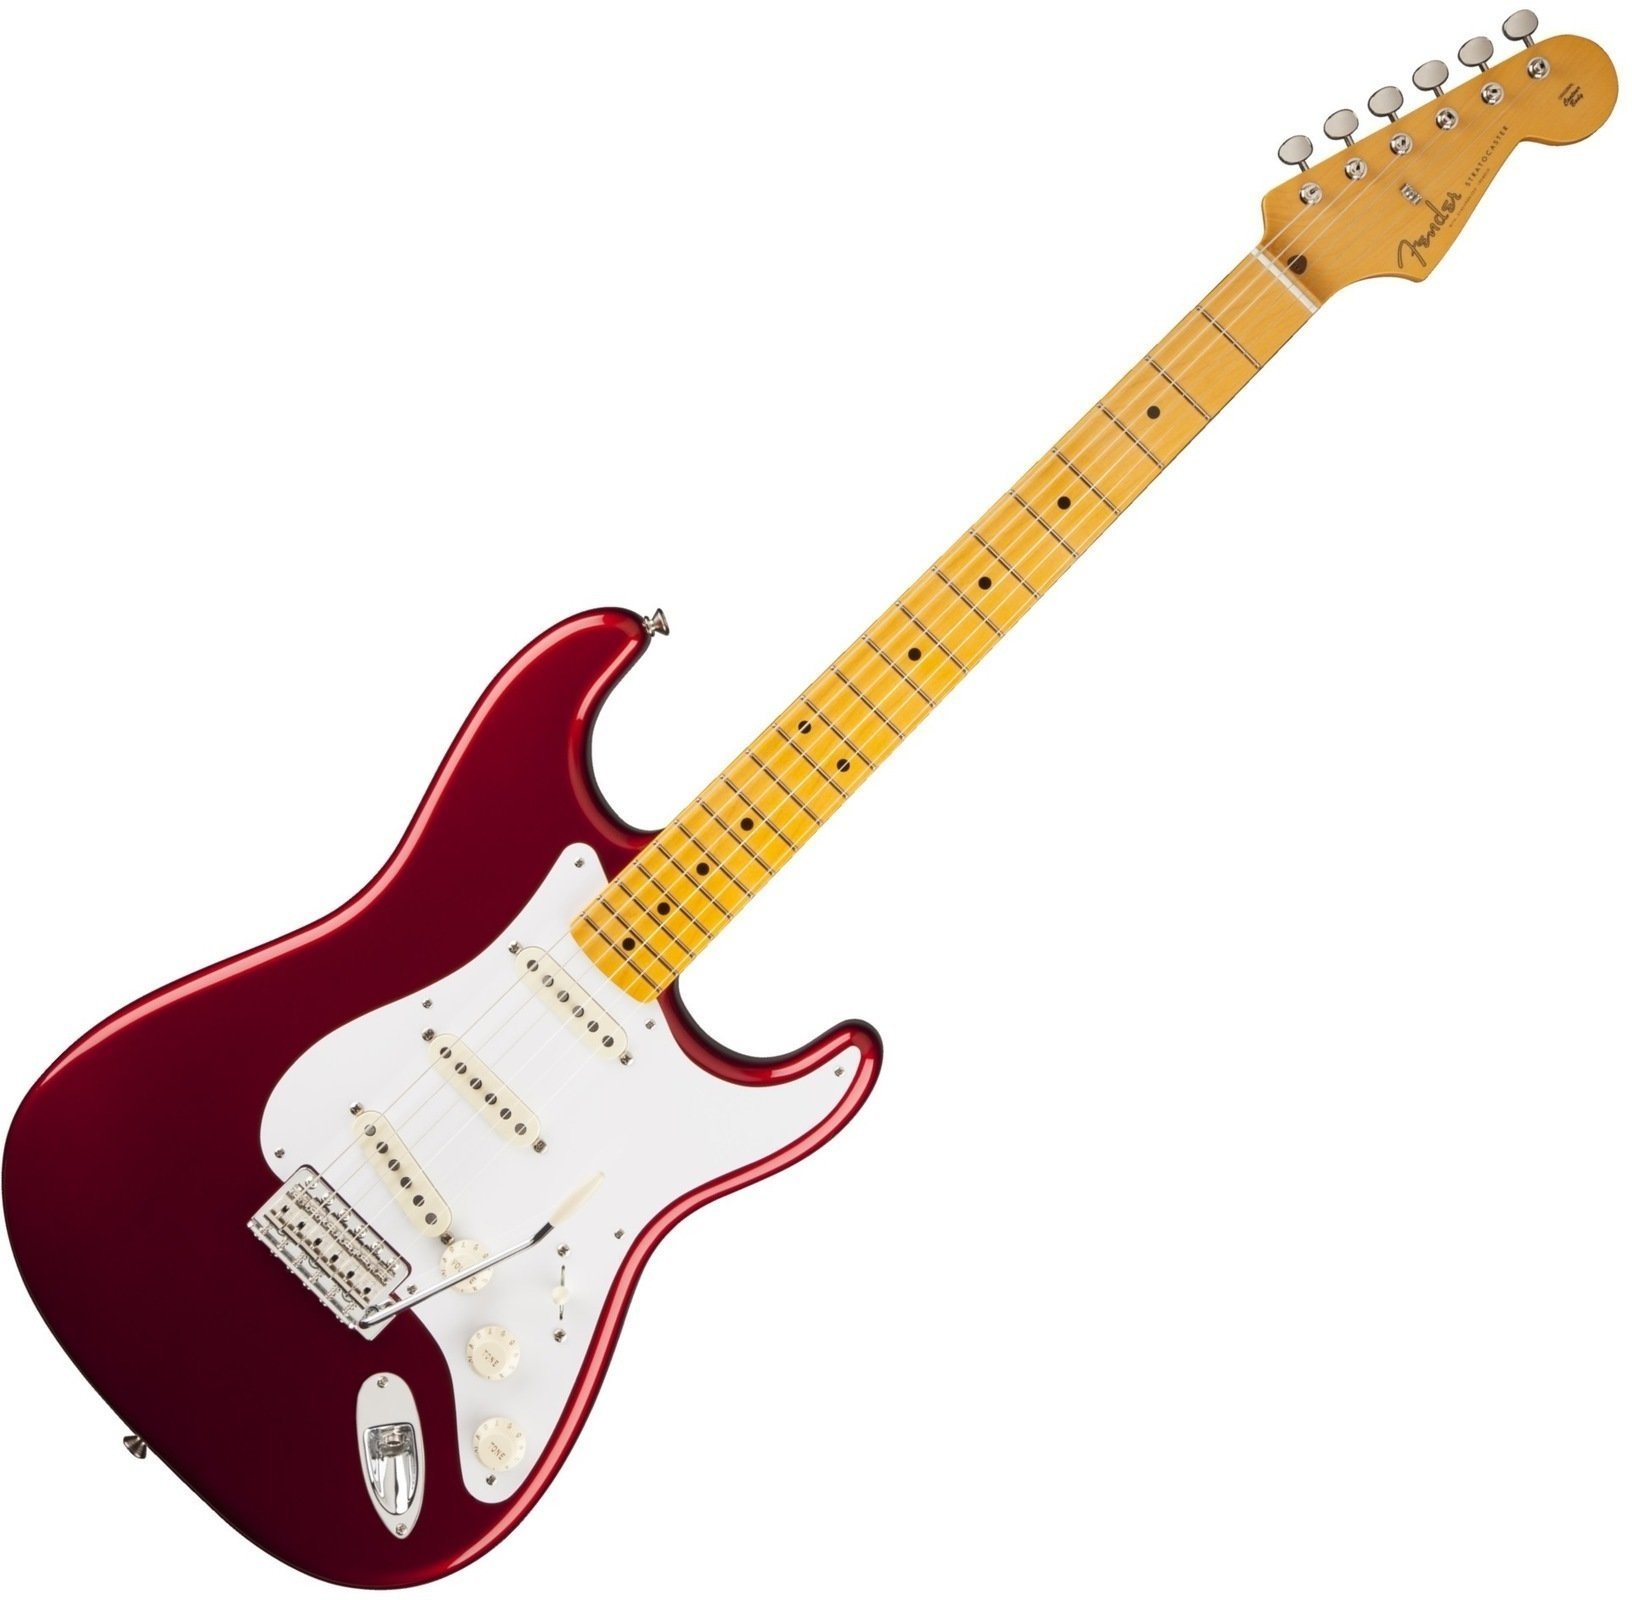 Sähkökitara Fender Classic Series '50s Stratocaster Lacquer, Maple Fingerboard, Candy Apple Red